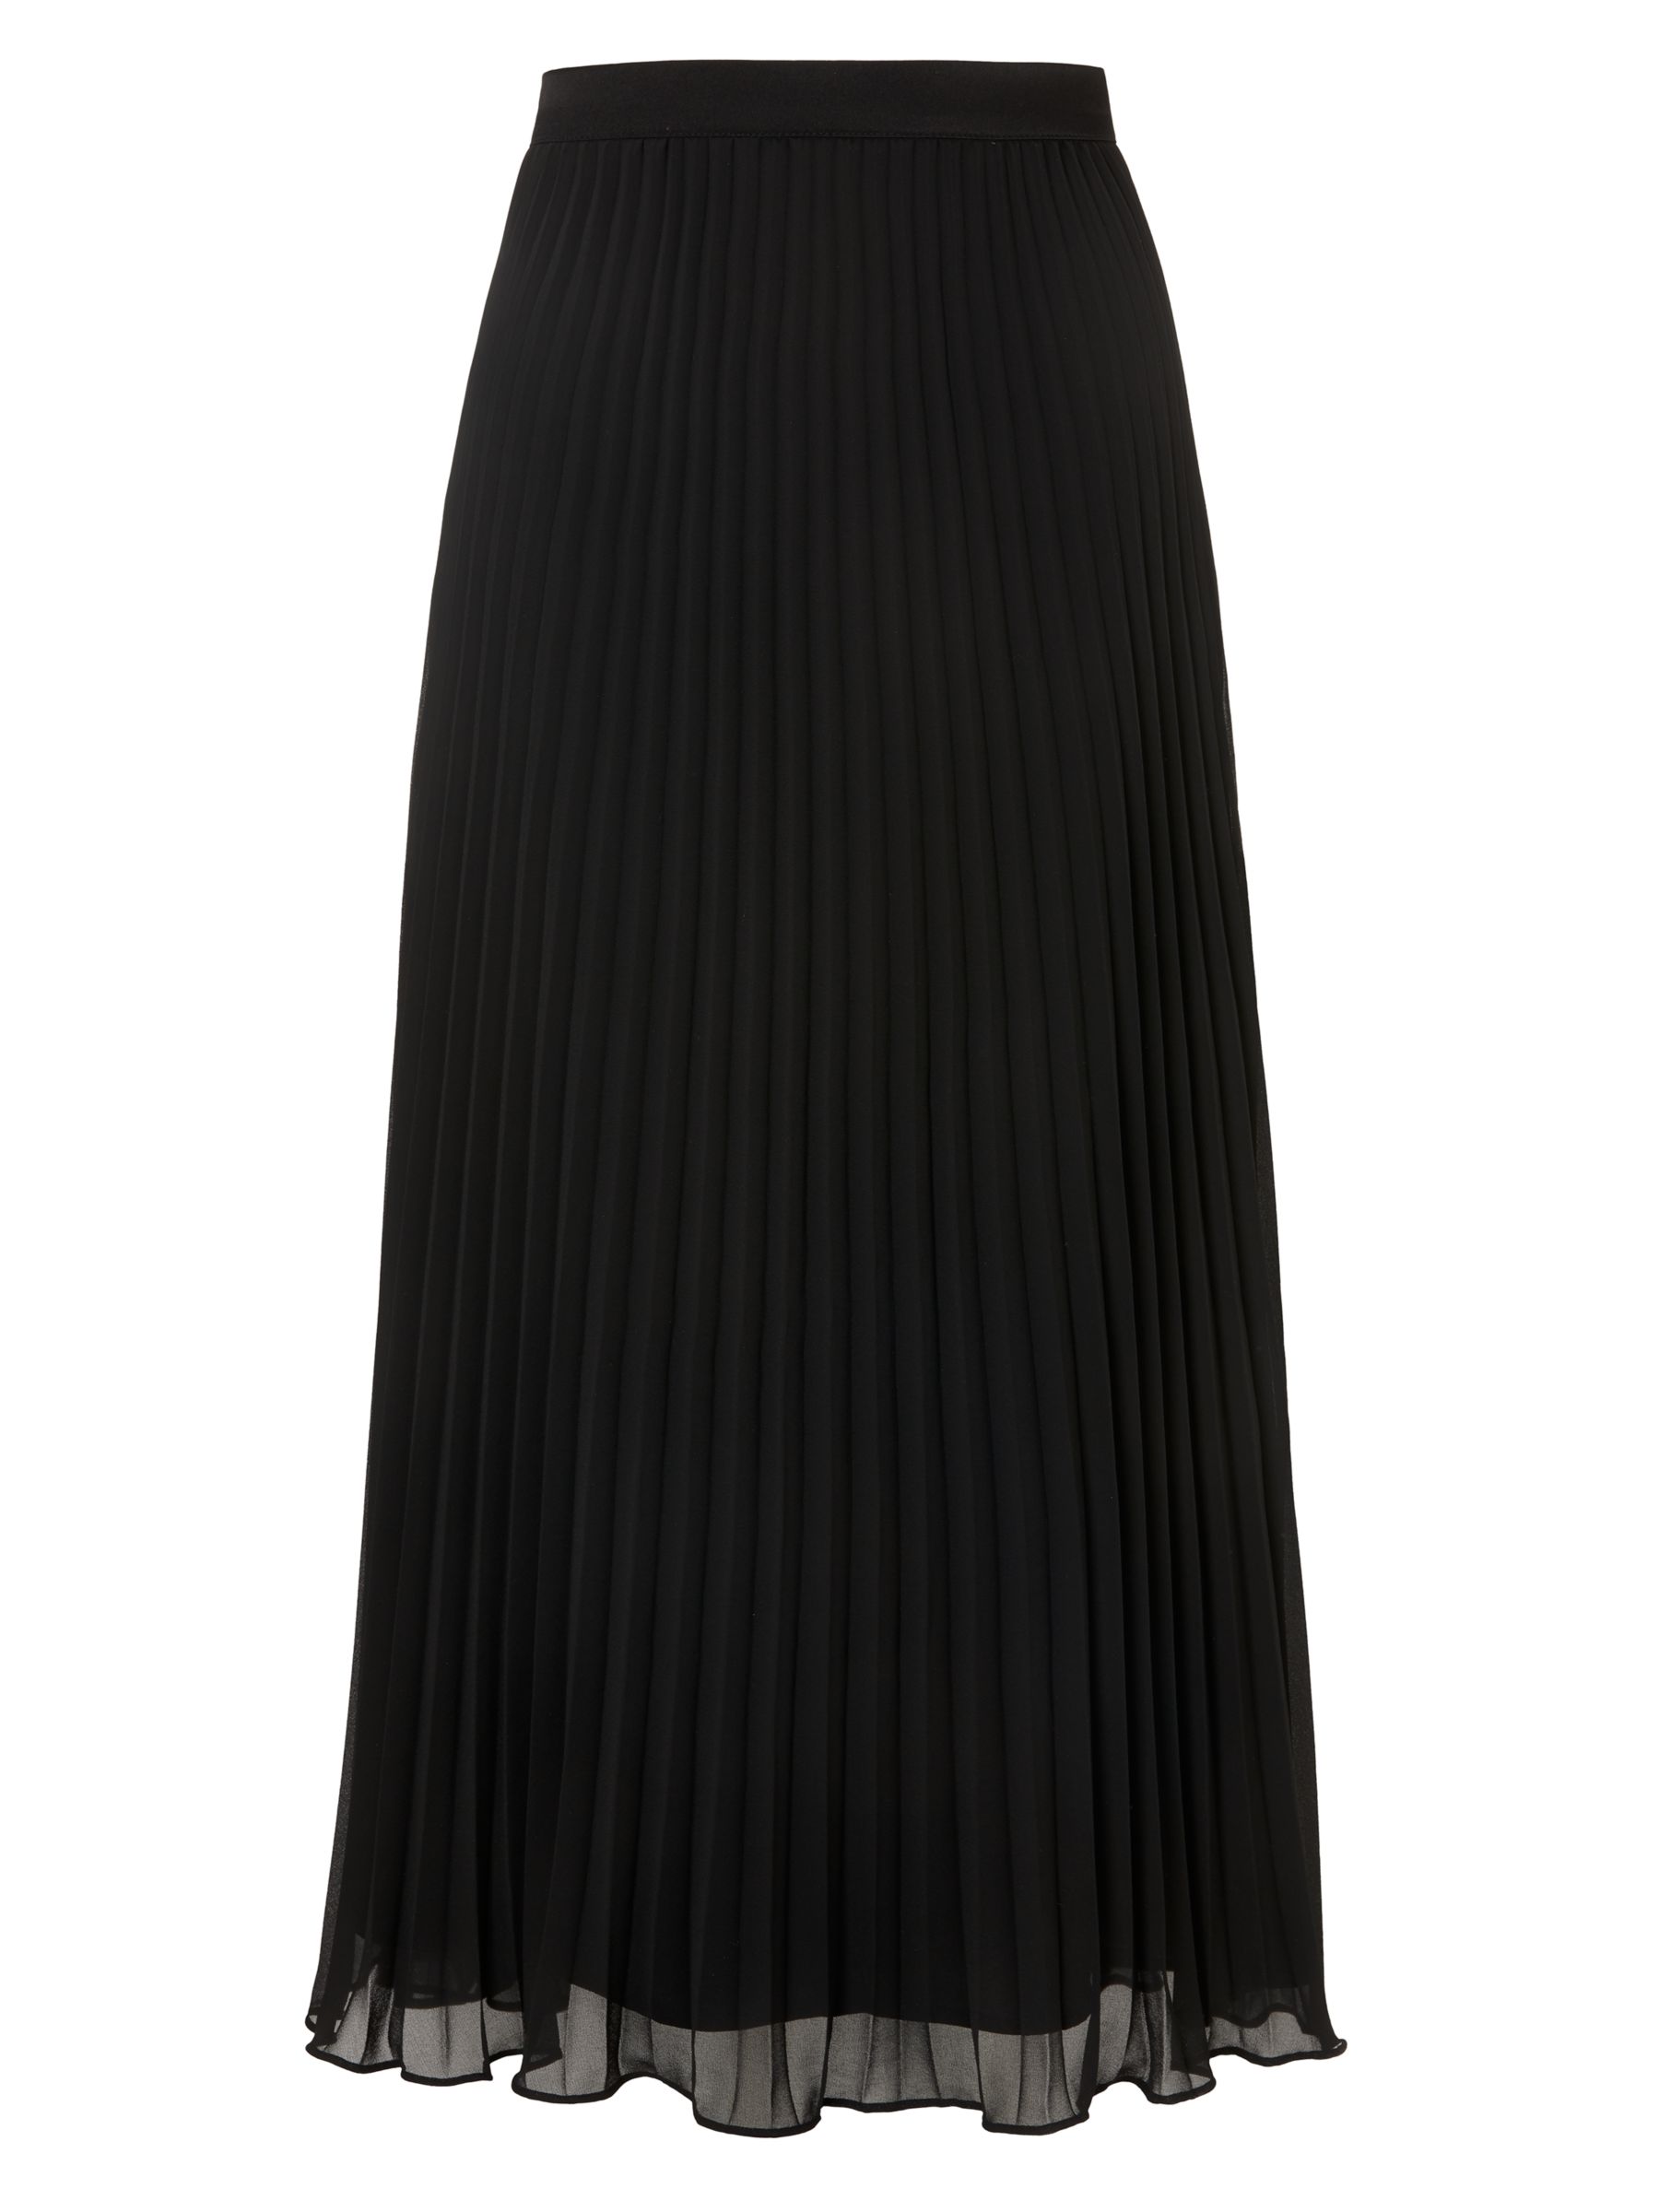 Bruce by Bruce Oldfield Pleated Skirt, Black